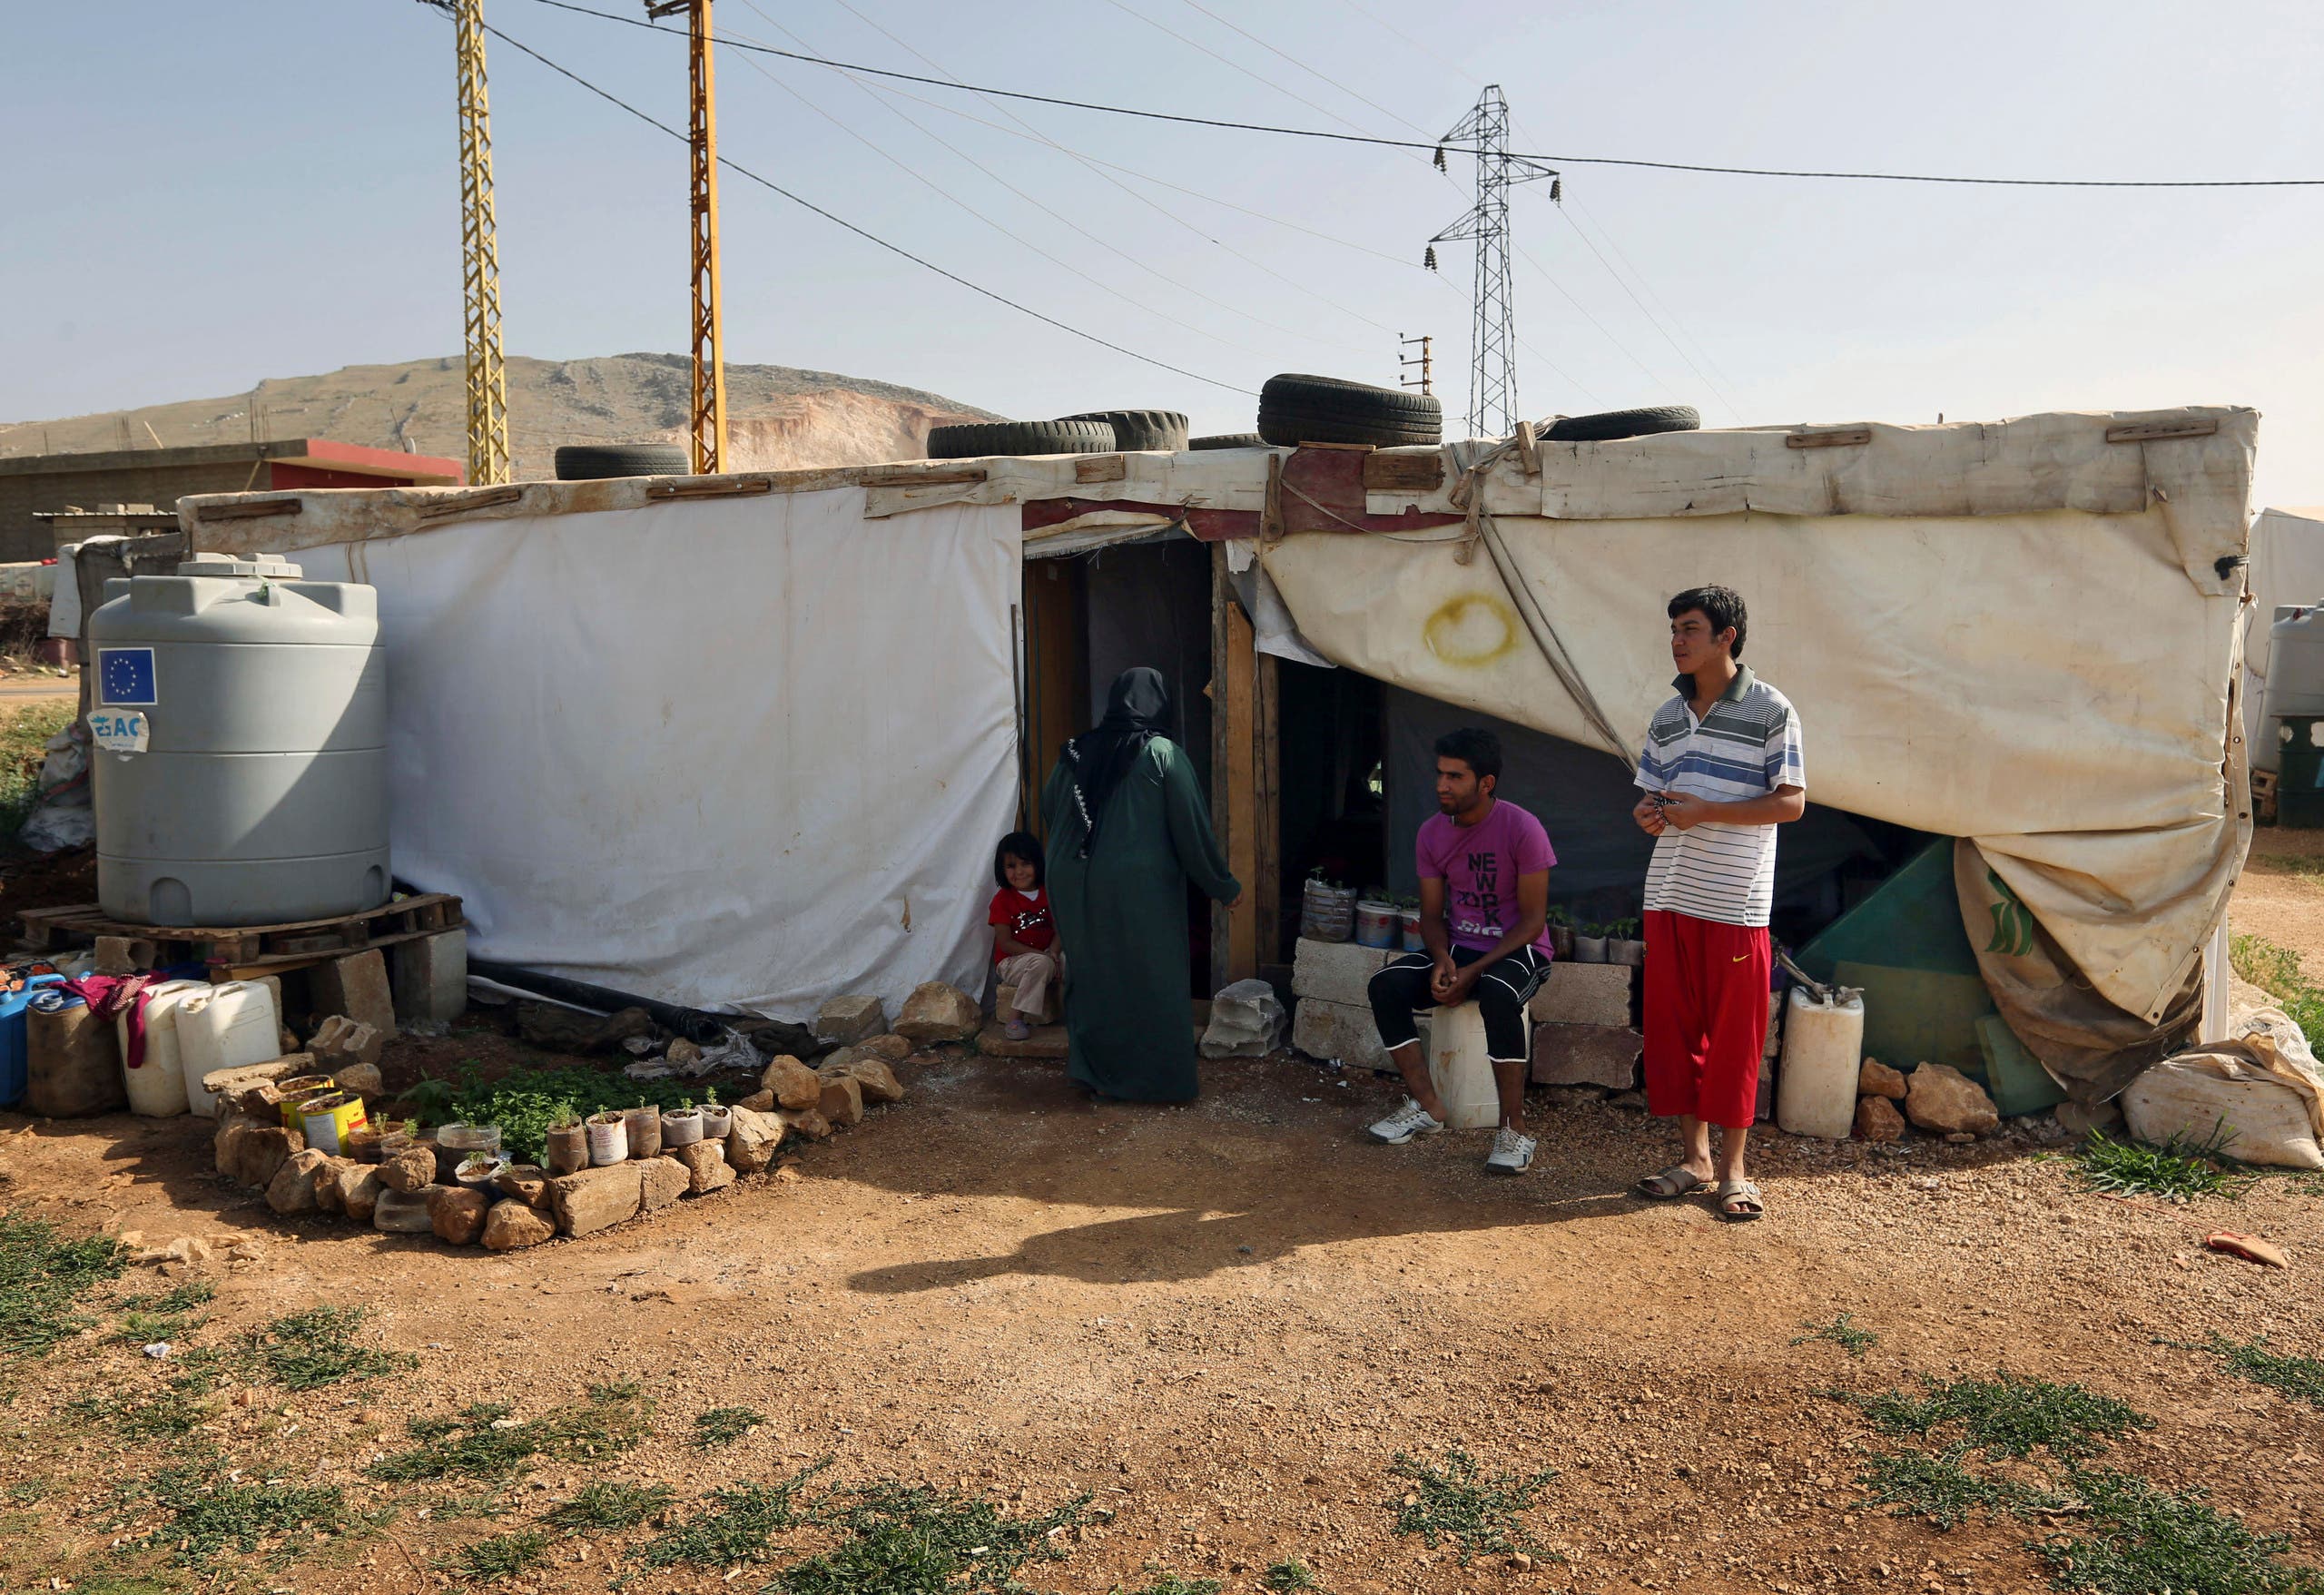 Syrian refugees stand outside their tent at a Syrian refugee camp in the eastern Lebanese town of Majdal Anjar, Lebanon. (File photo: AP)